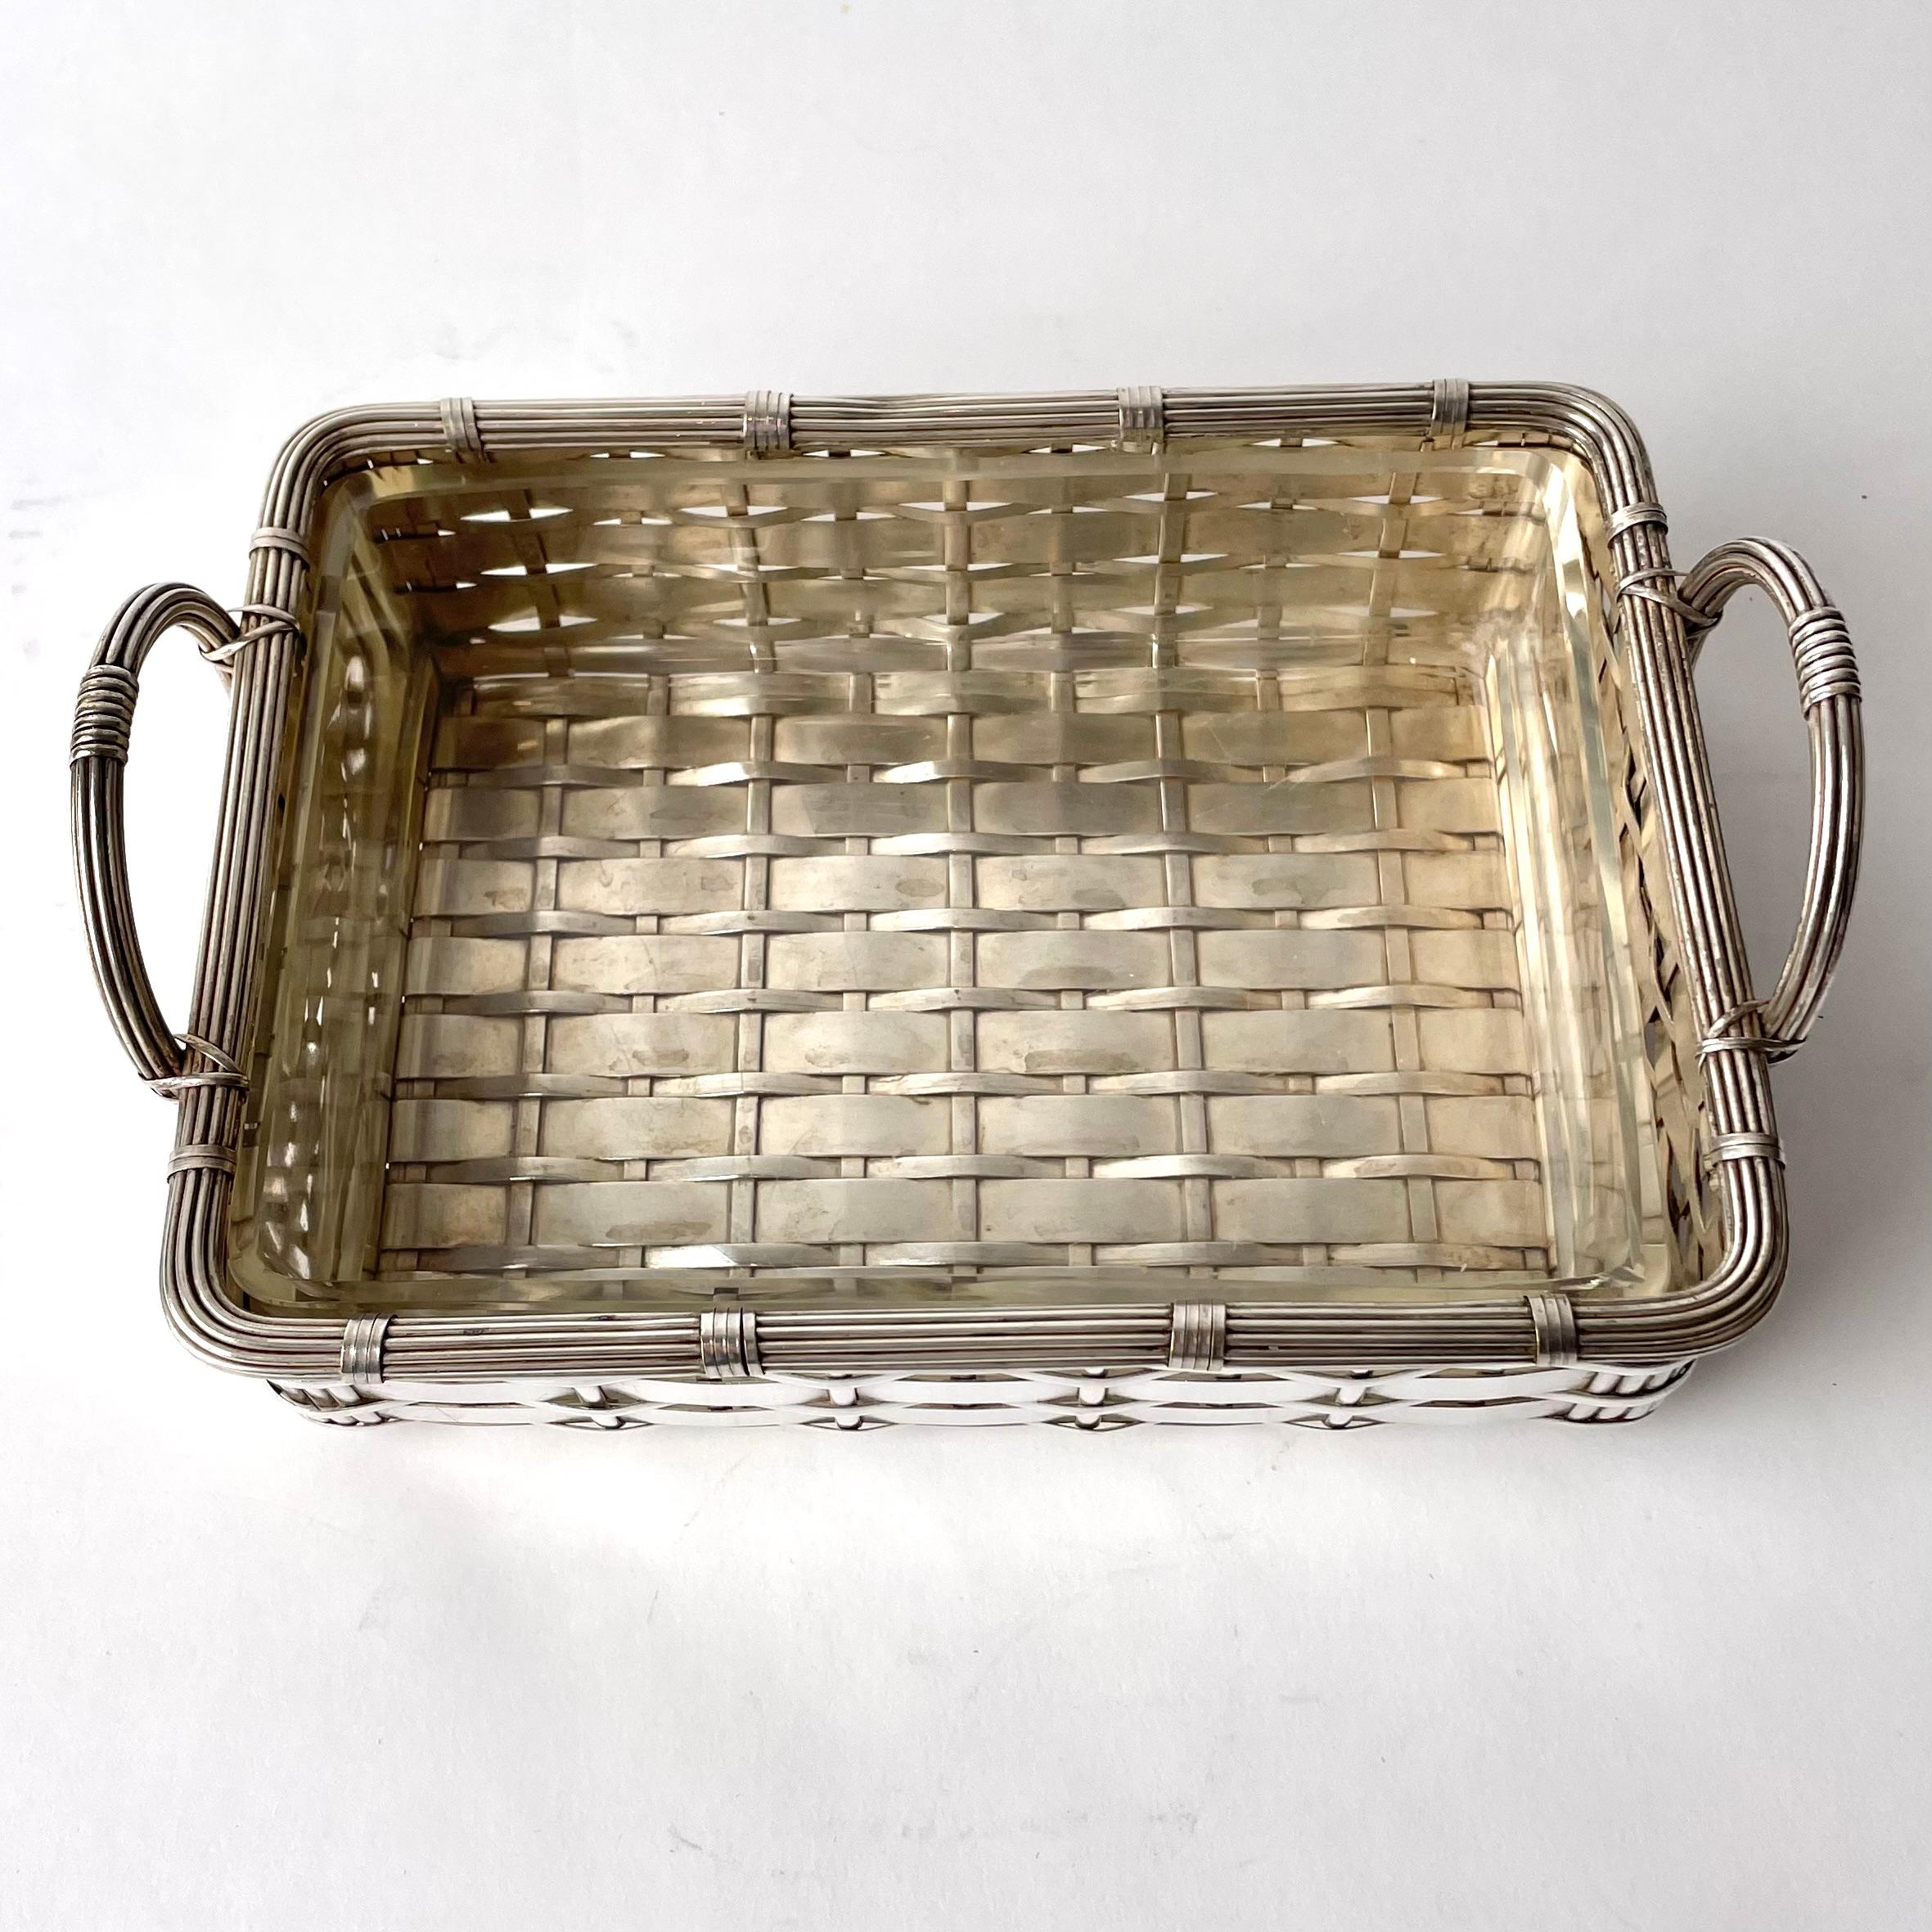 Silvered Serving Bowl in silver plated braided metal with glass insert Early 20th Century For Sale